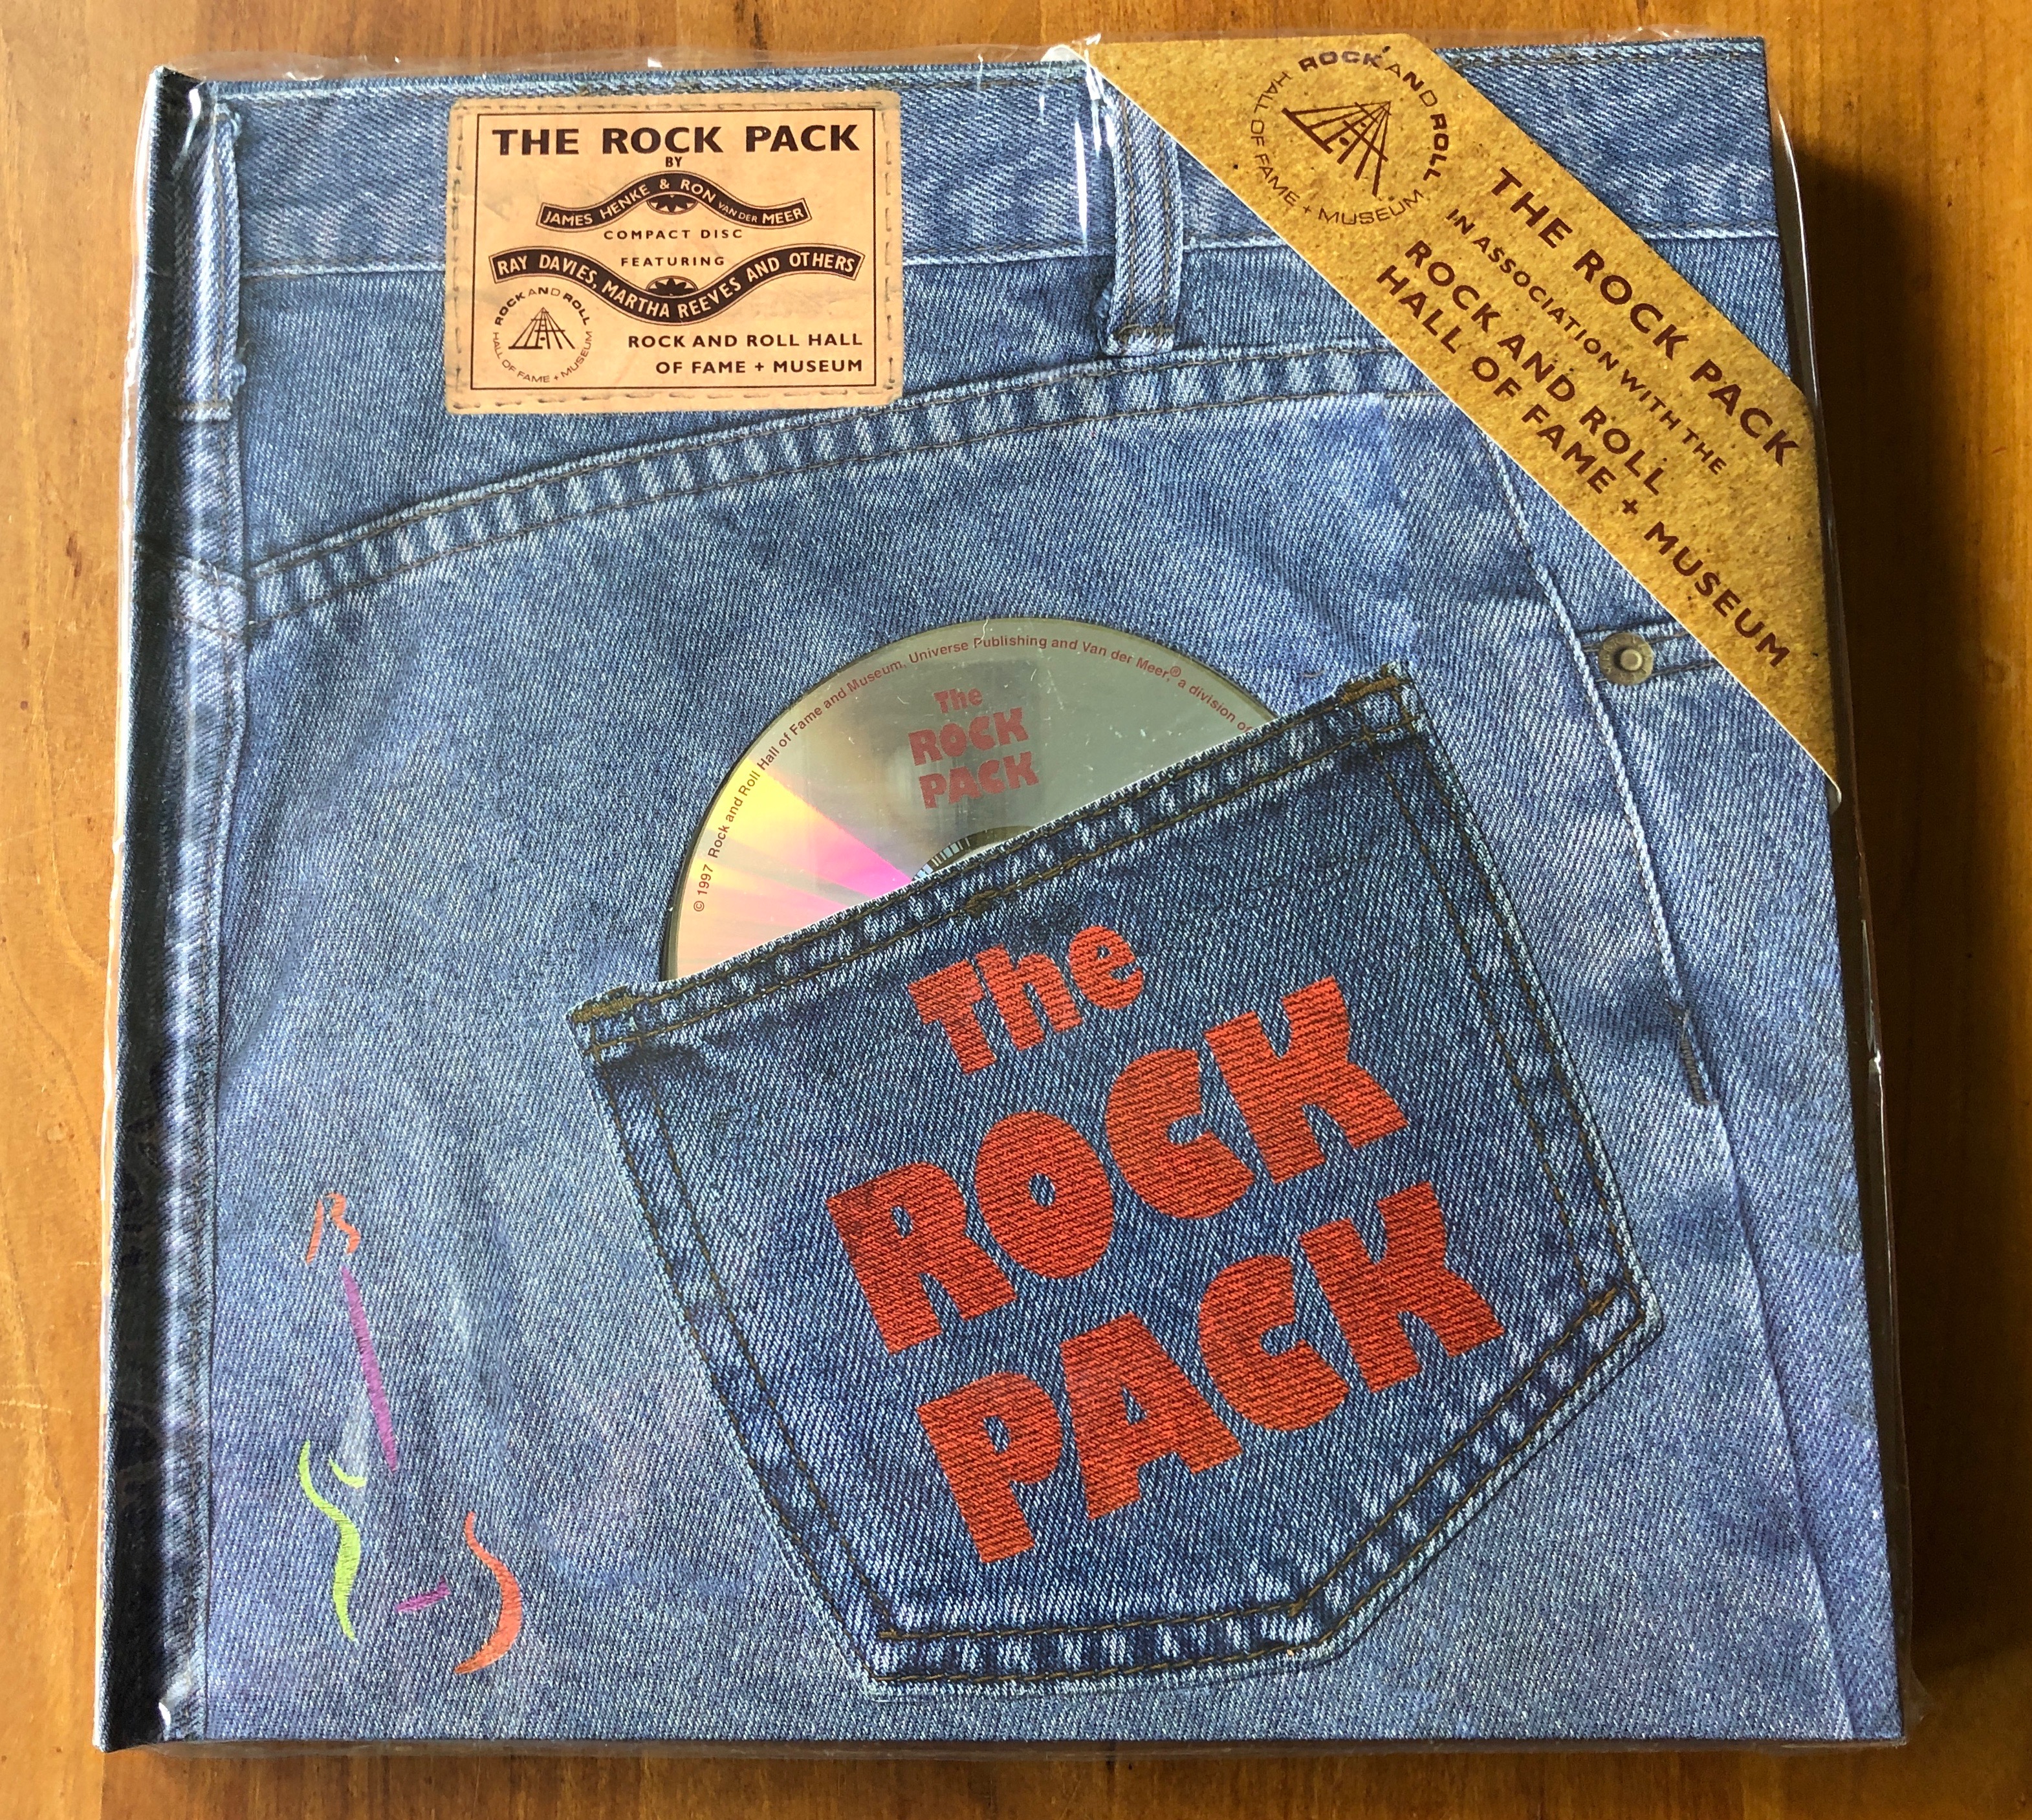 The Rock Pack in Association With the Rock and Roll Hall of Fame + Museum.